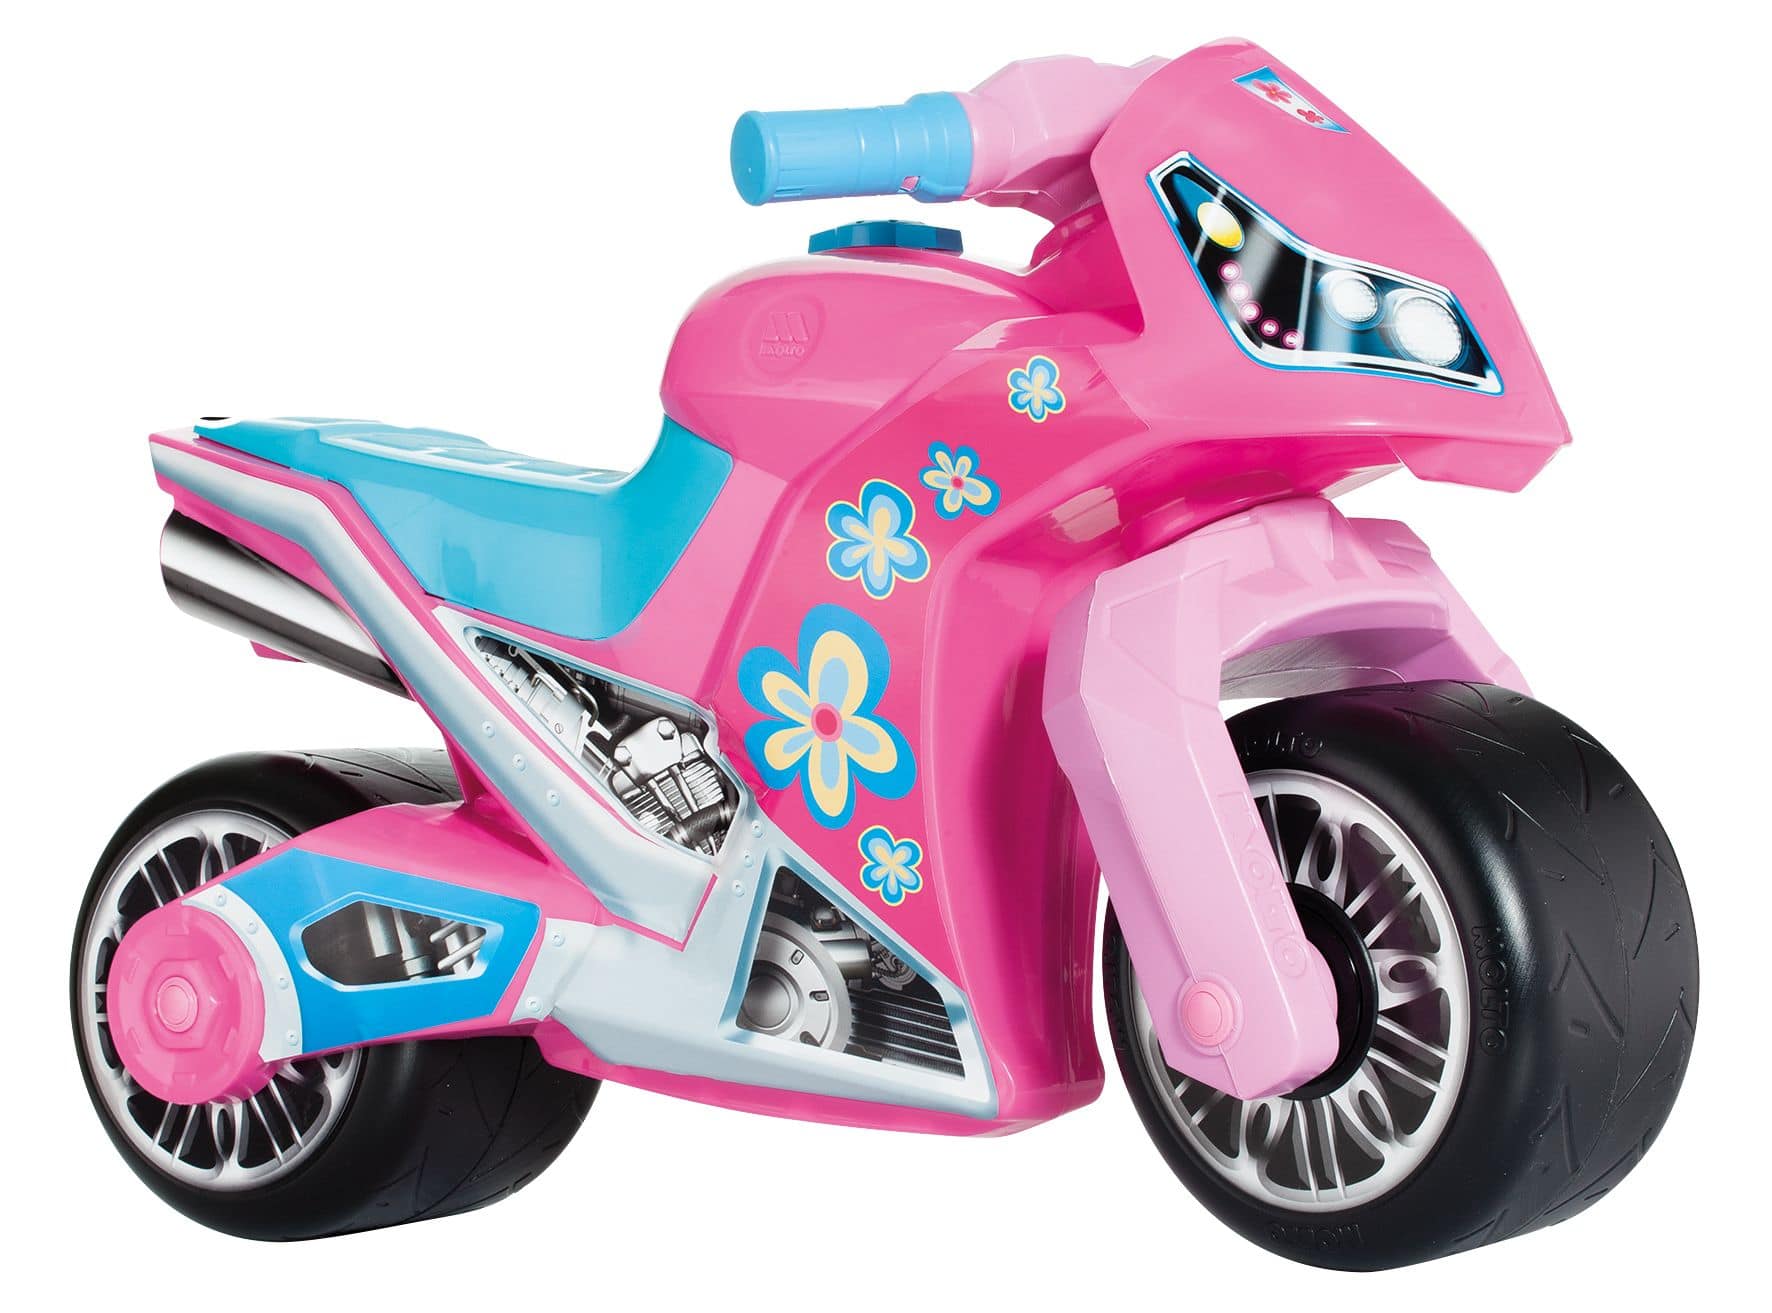 https://www.rofu.de/out/pictures/master/product/1/8410963122220_molto_motorrad_cross_rosa.jpg